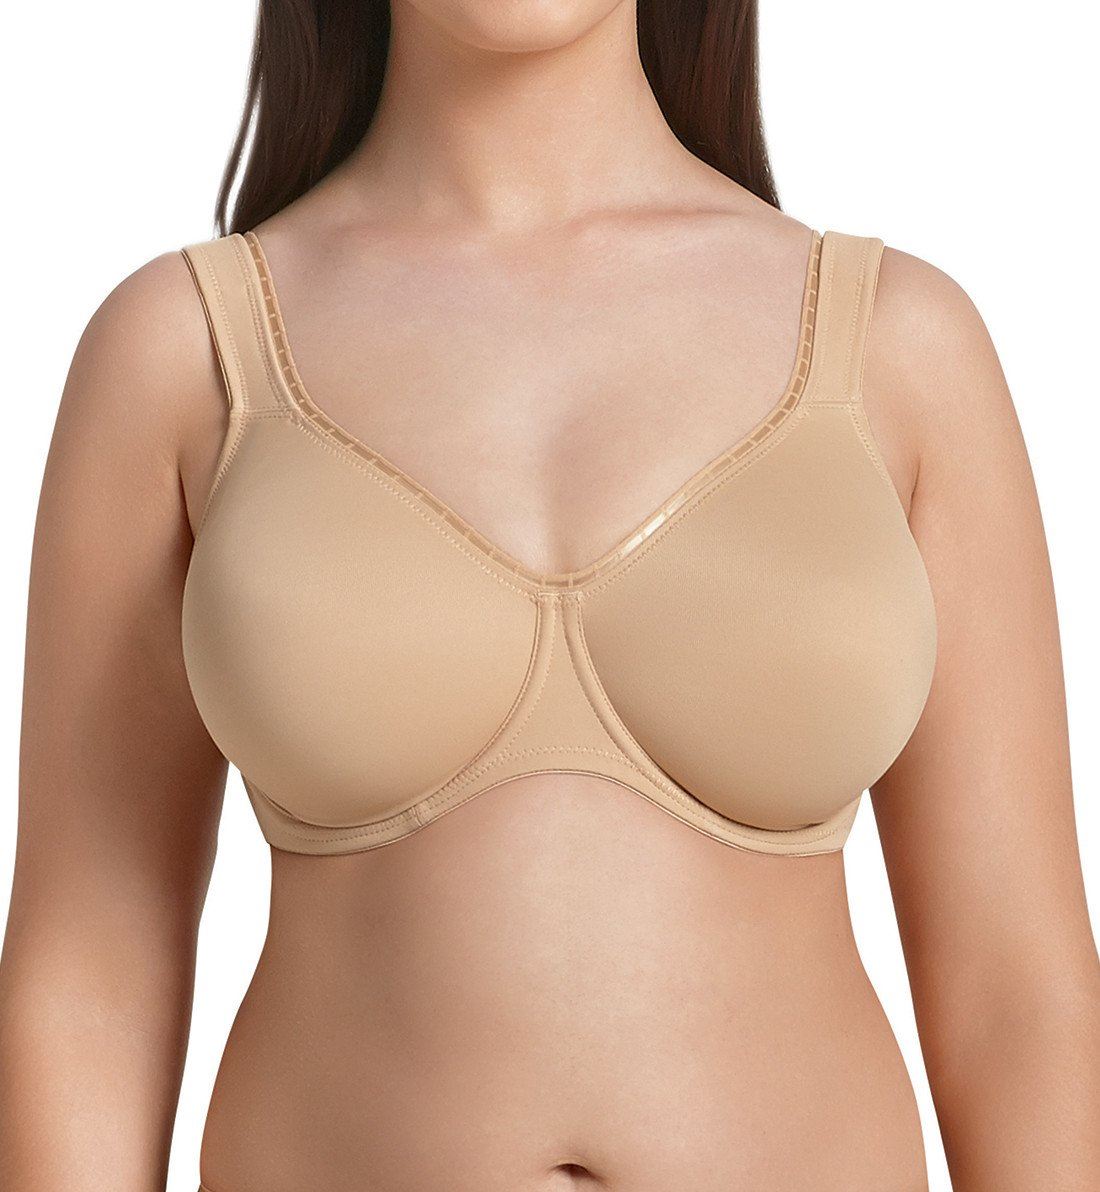 Rosa Faia by Anita Twin Firm Seamless Support Underwire Bra (5694),30D,Skin - Skin,30D